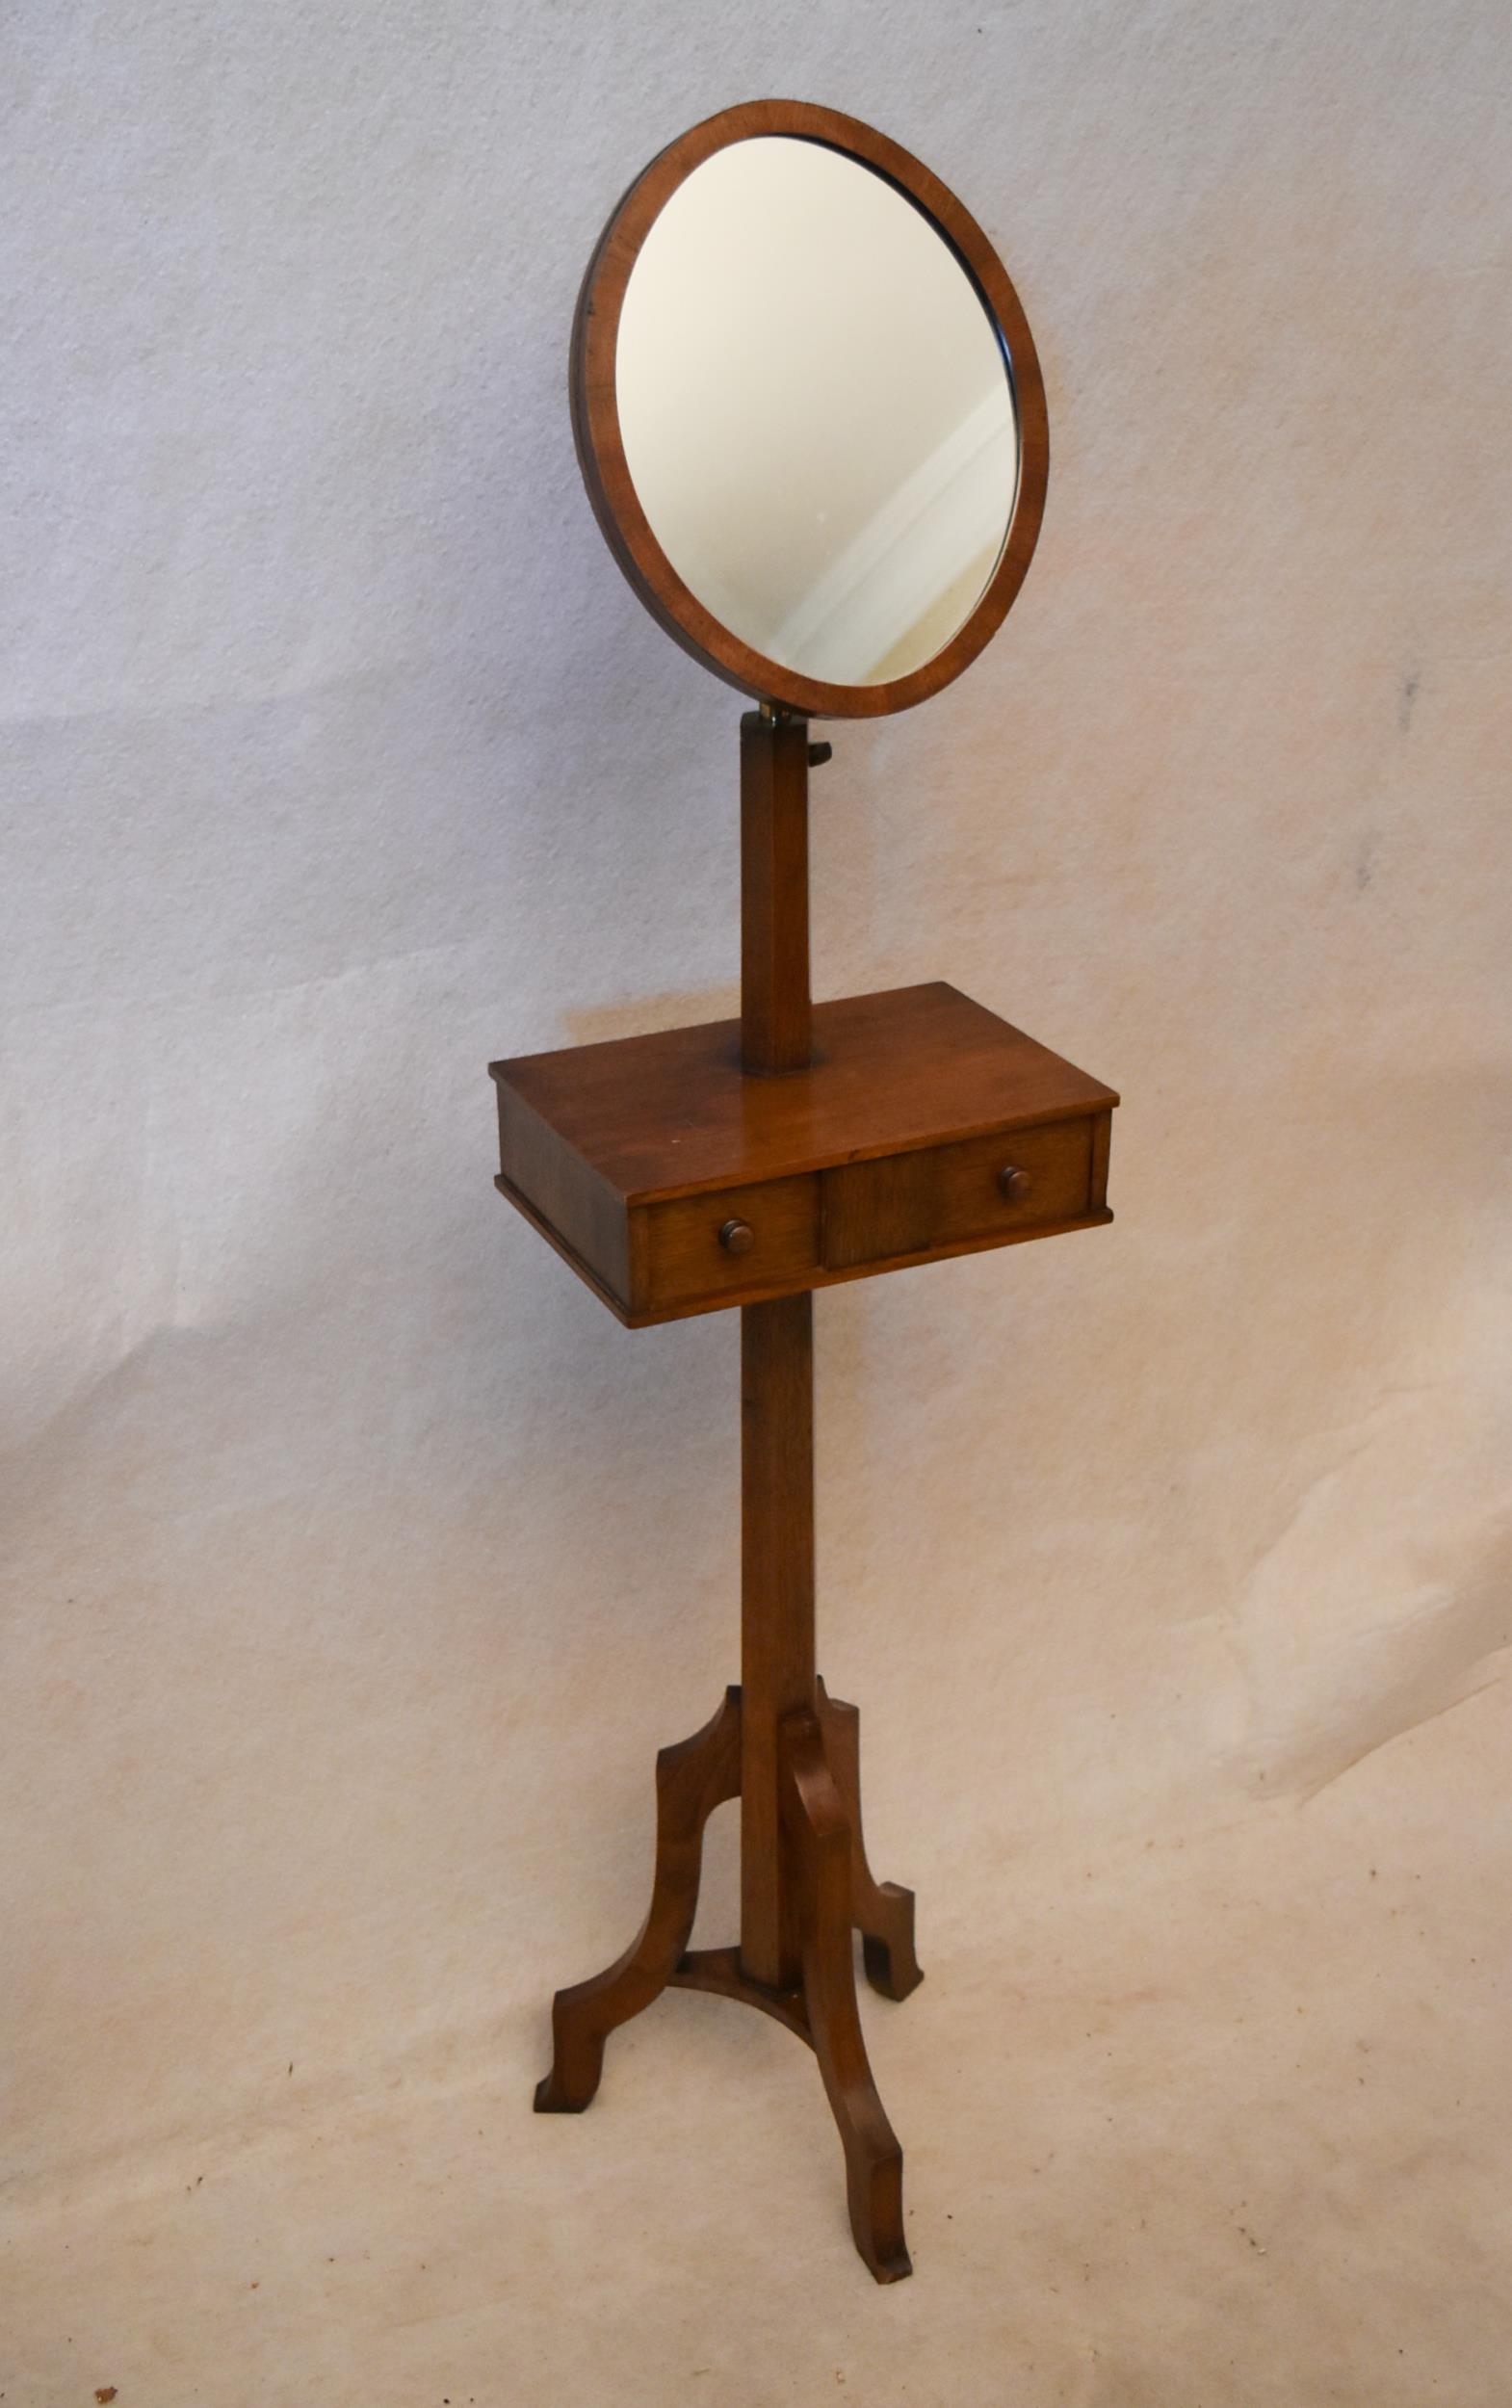 An early 20th century oak gentleman's shaving stand, with an oval mirror on a telescopic frame,